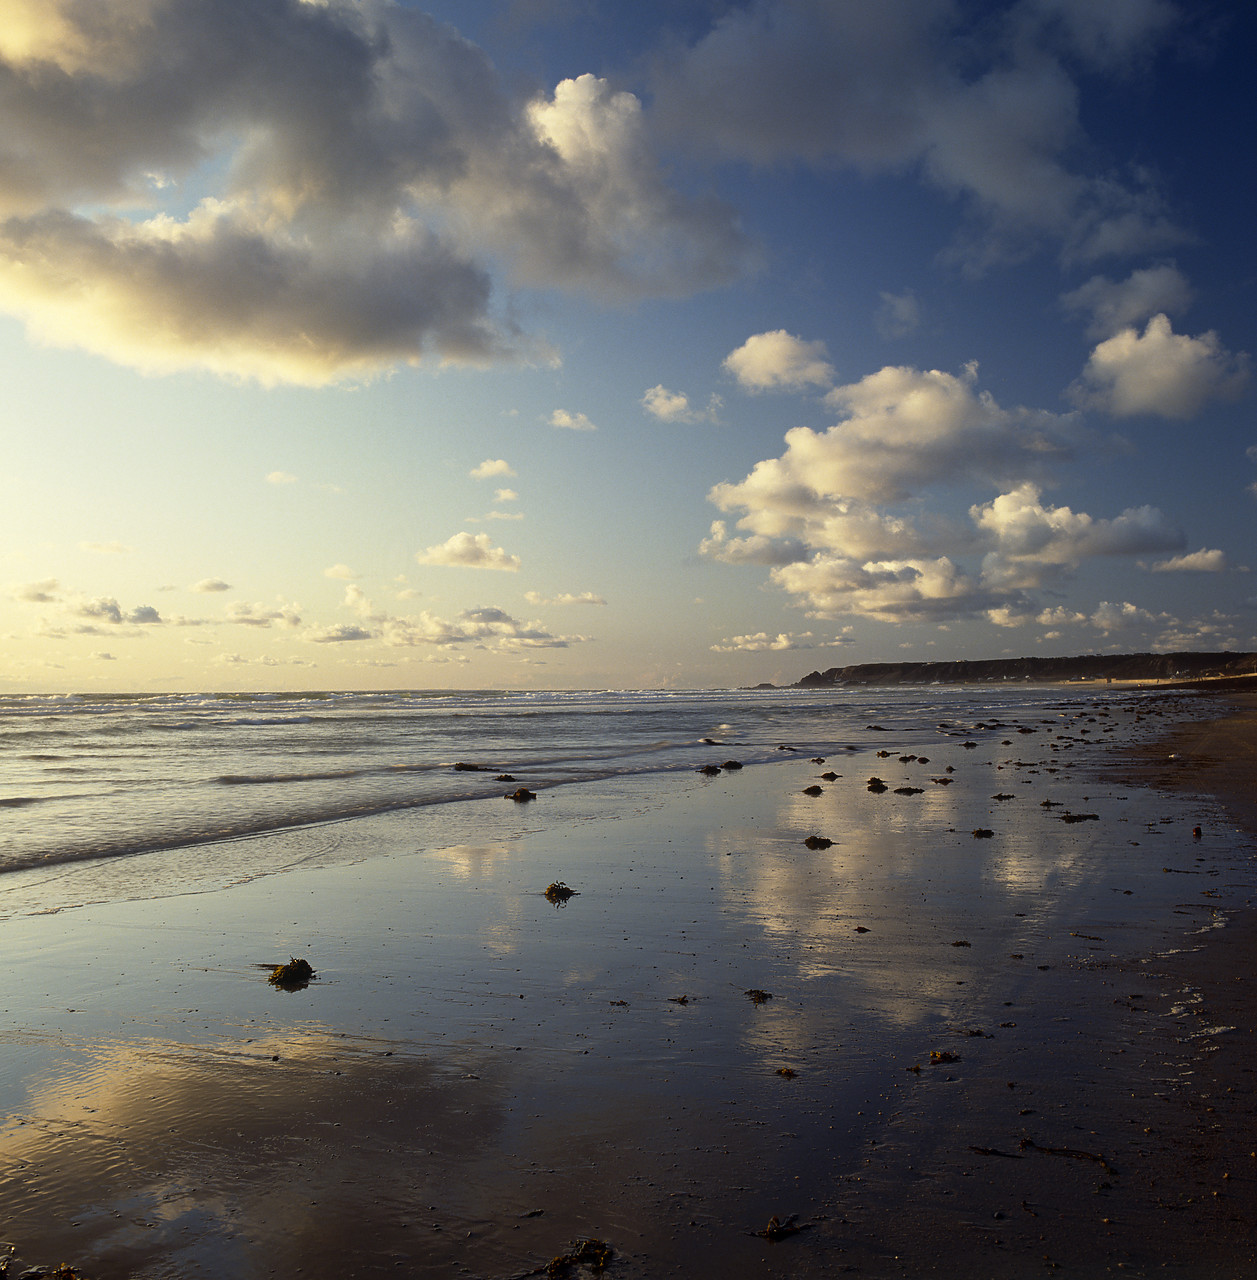 #945031 - Clouds Reflecting on Beach, St. Ouen's Bay, Jersey, Channel Islands